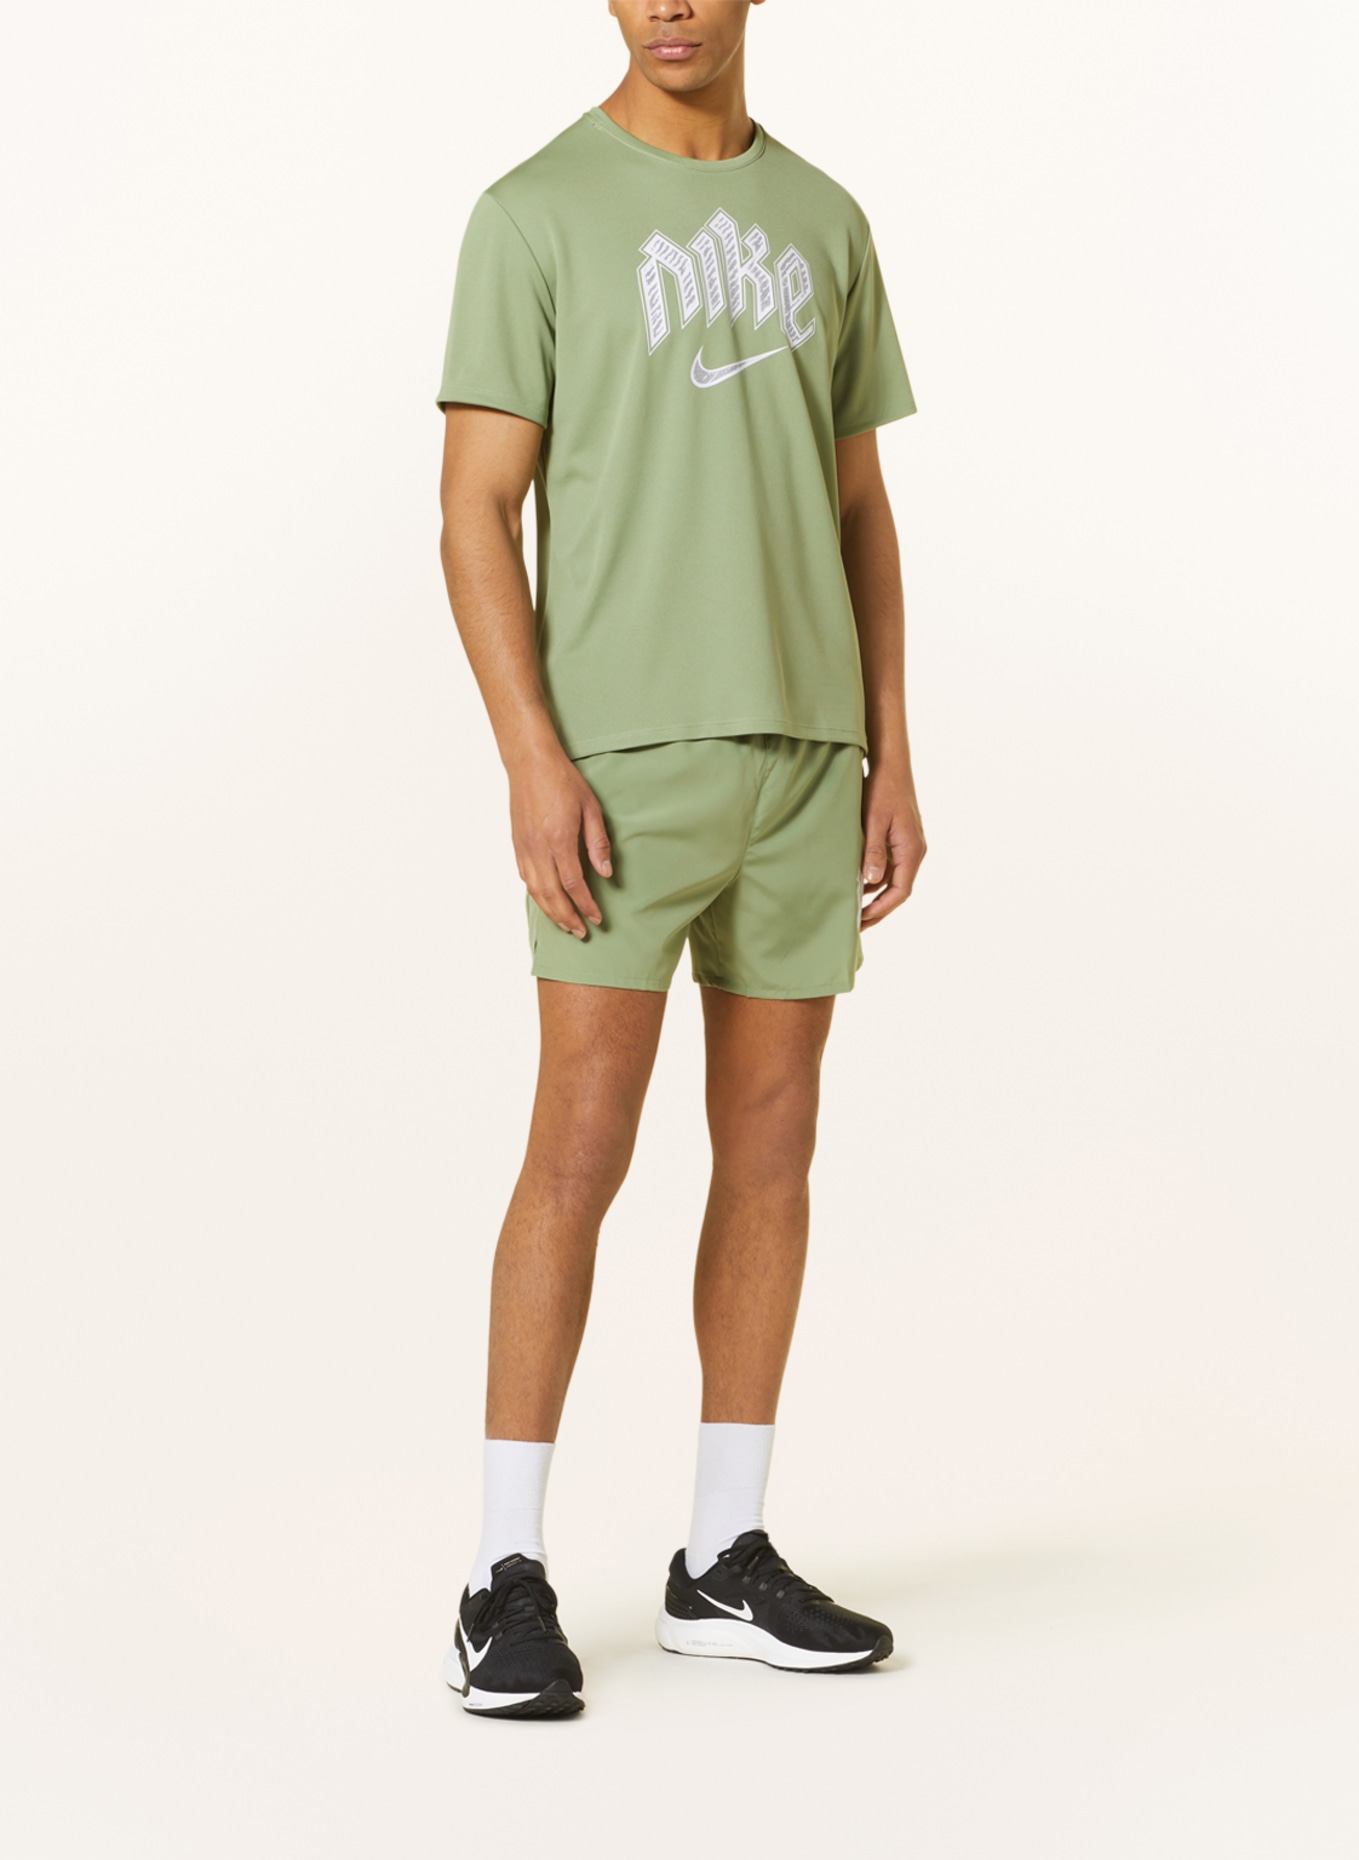 Nike 2-in-1 running shorts DRI-FIT RUN DIVISION CHALLENGE with mesh, Color: OLIVE/ NEON GREEN/ SILVER (Image 2)